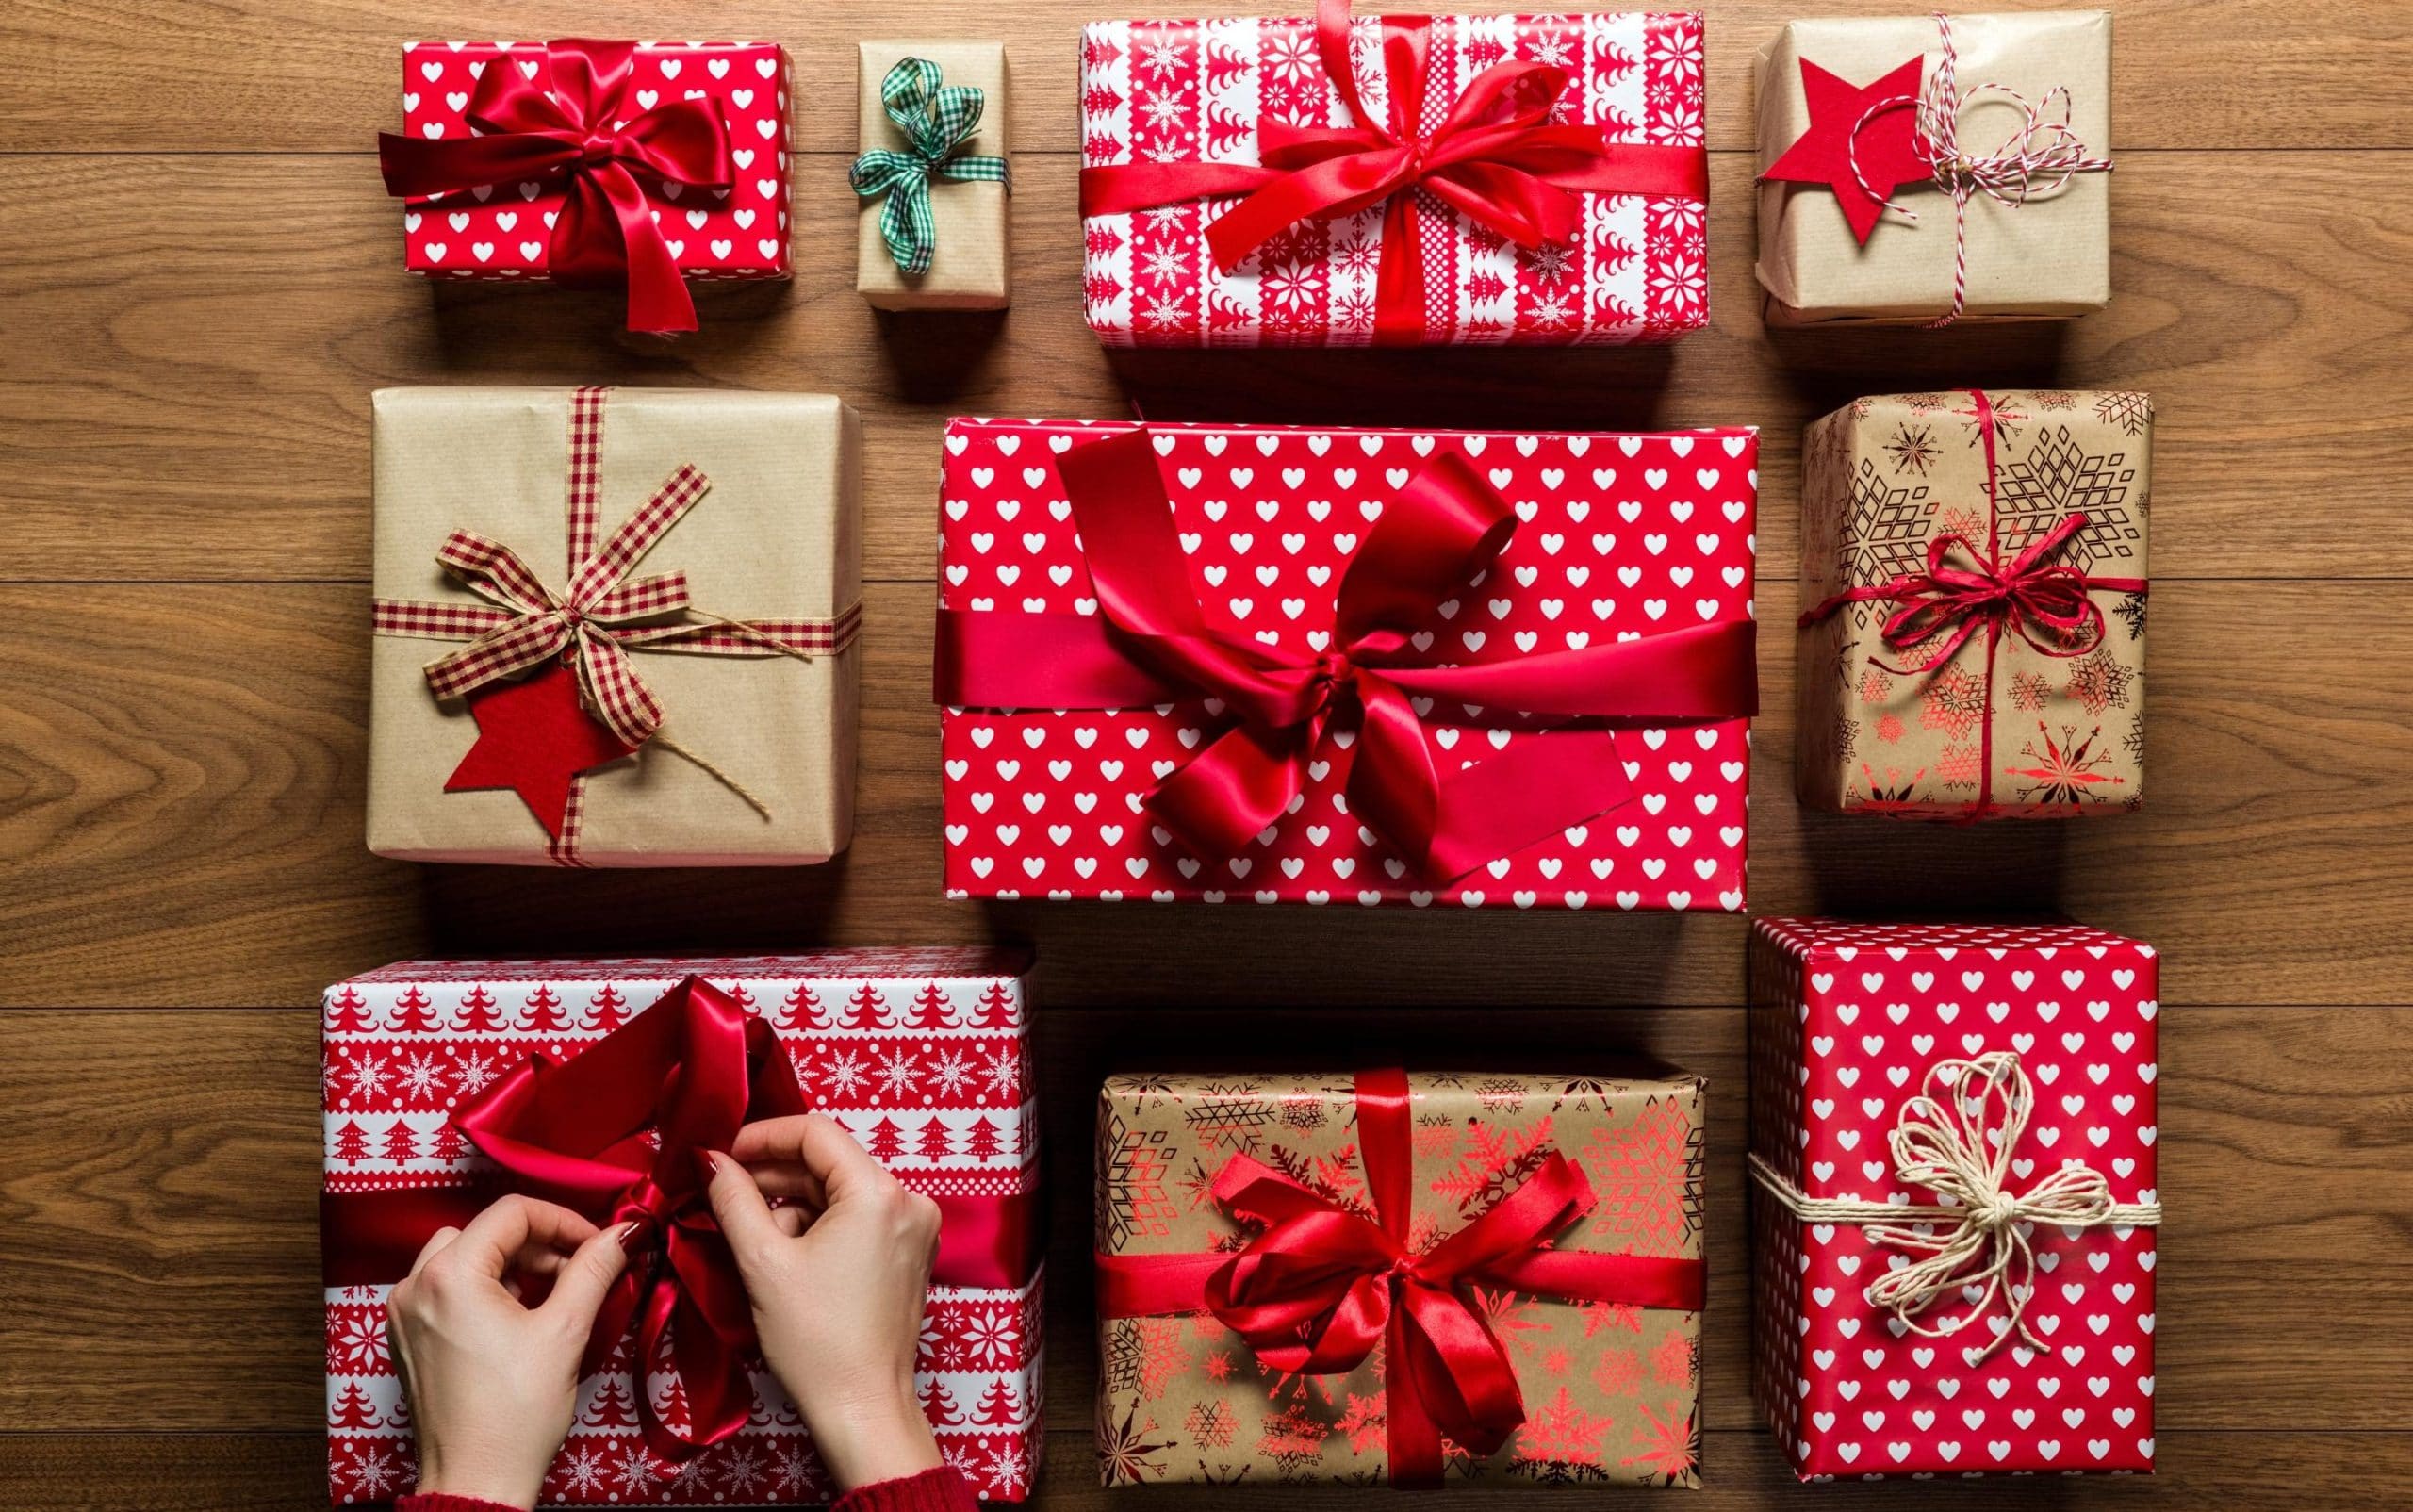 December: Christmas Gifts You Can Give Families And Friends